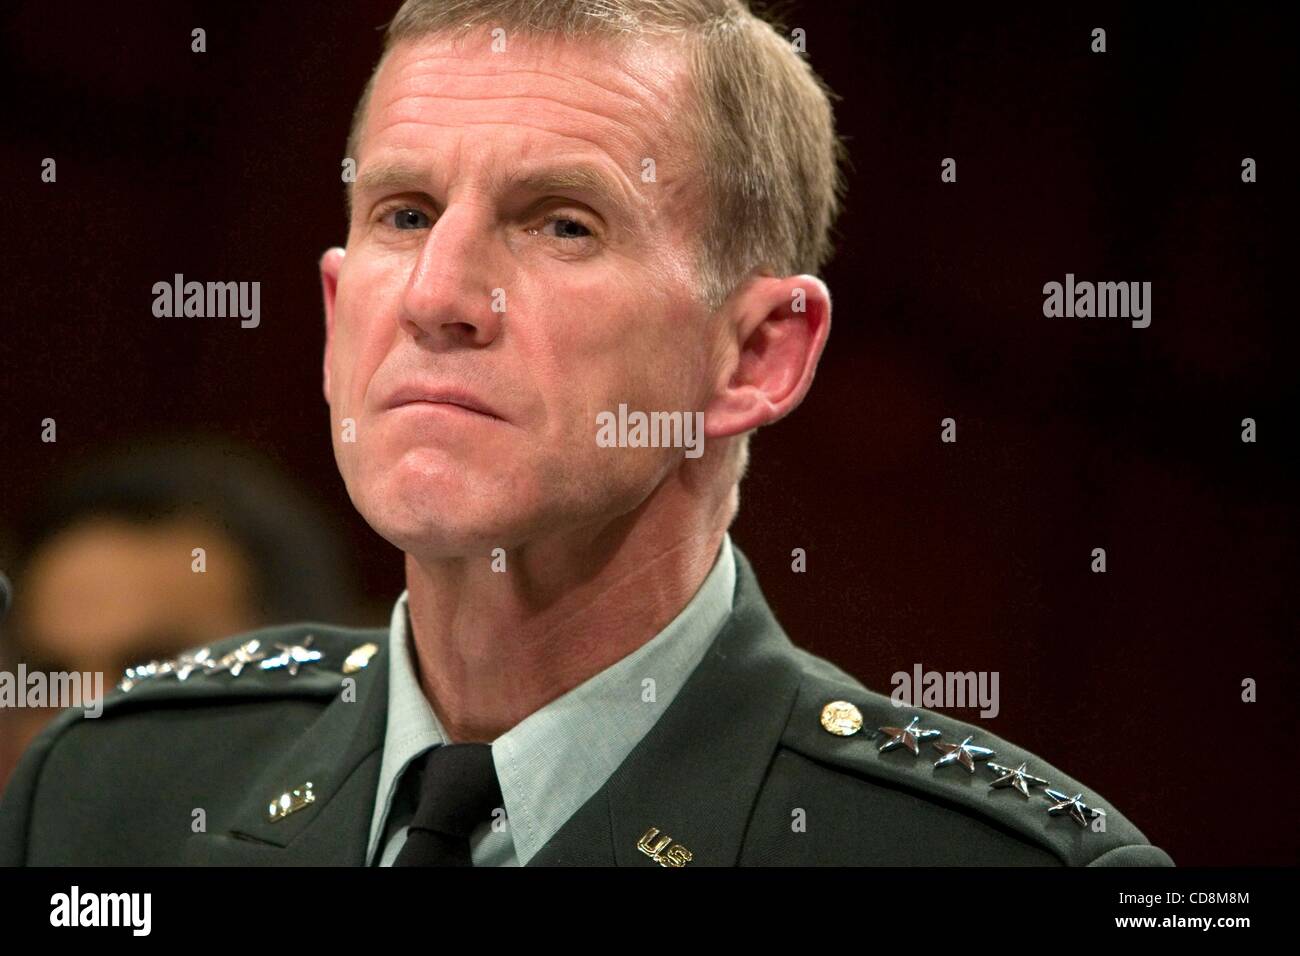 Dec 08, 2009 - Washington, District of Columbia, USA - Gen. STANLEY MCCHRYSTAL; Commander of the NATO International Security Assistance force during a hearing on Strategy in Afghanistan and Pakistan (Credit Image: Â© Oscar Matatquin/ZUMA Press) Stock Photo